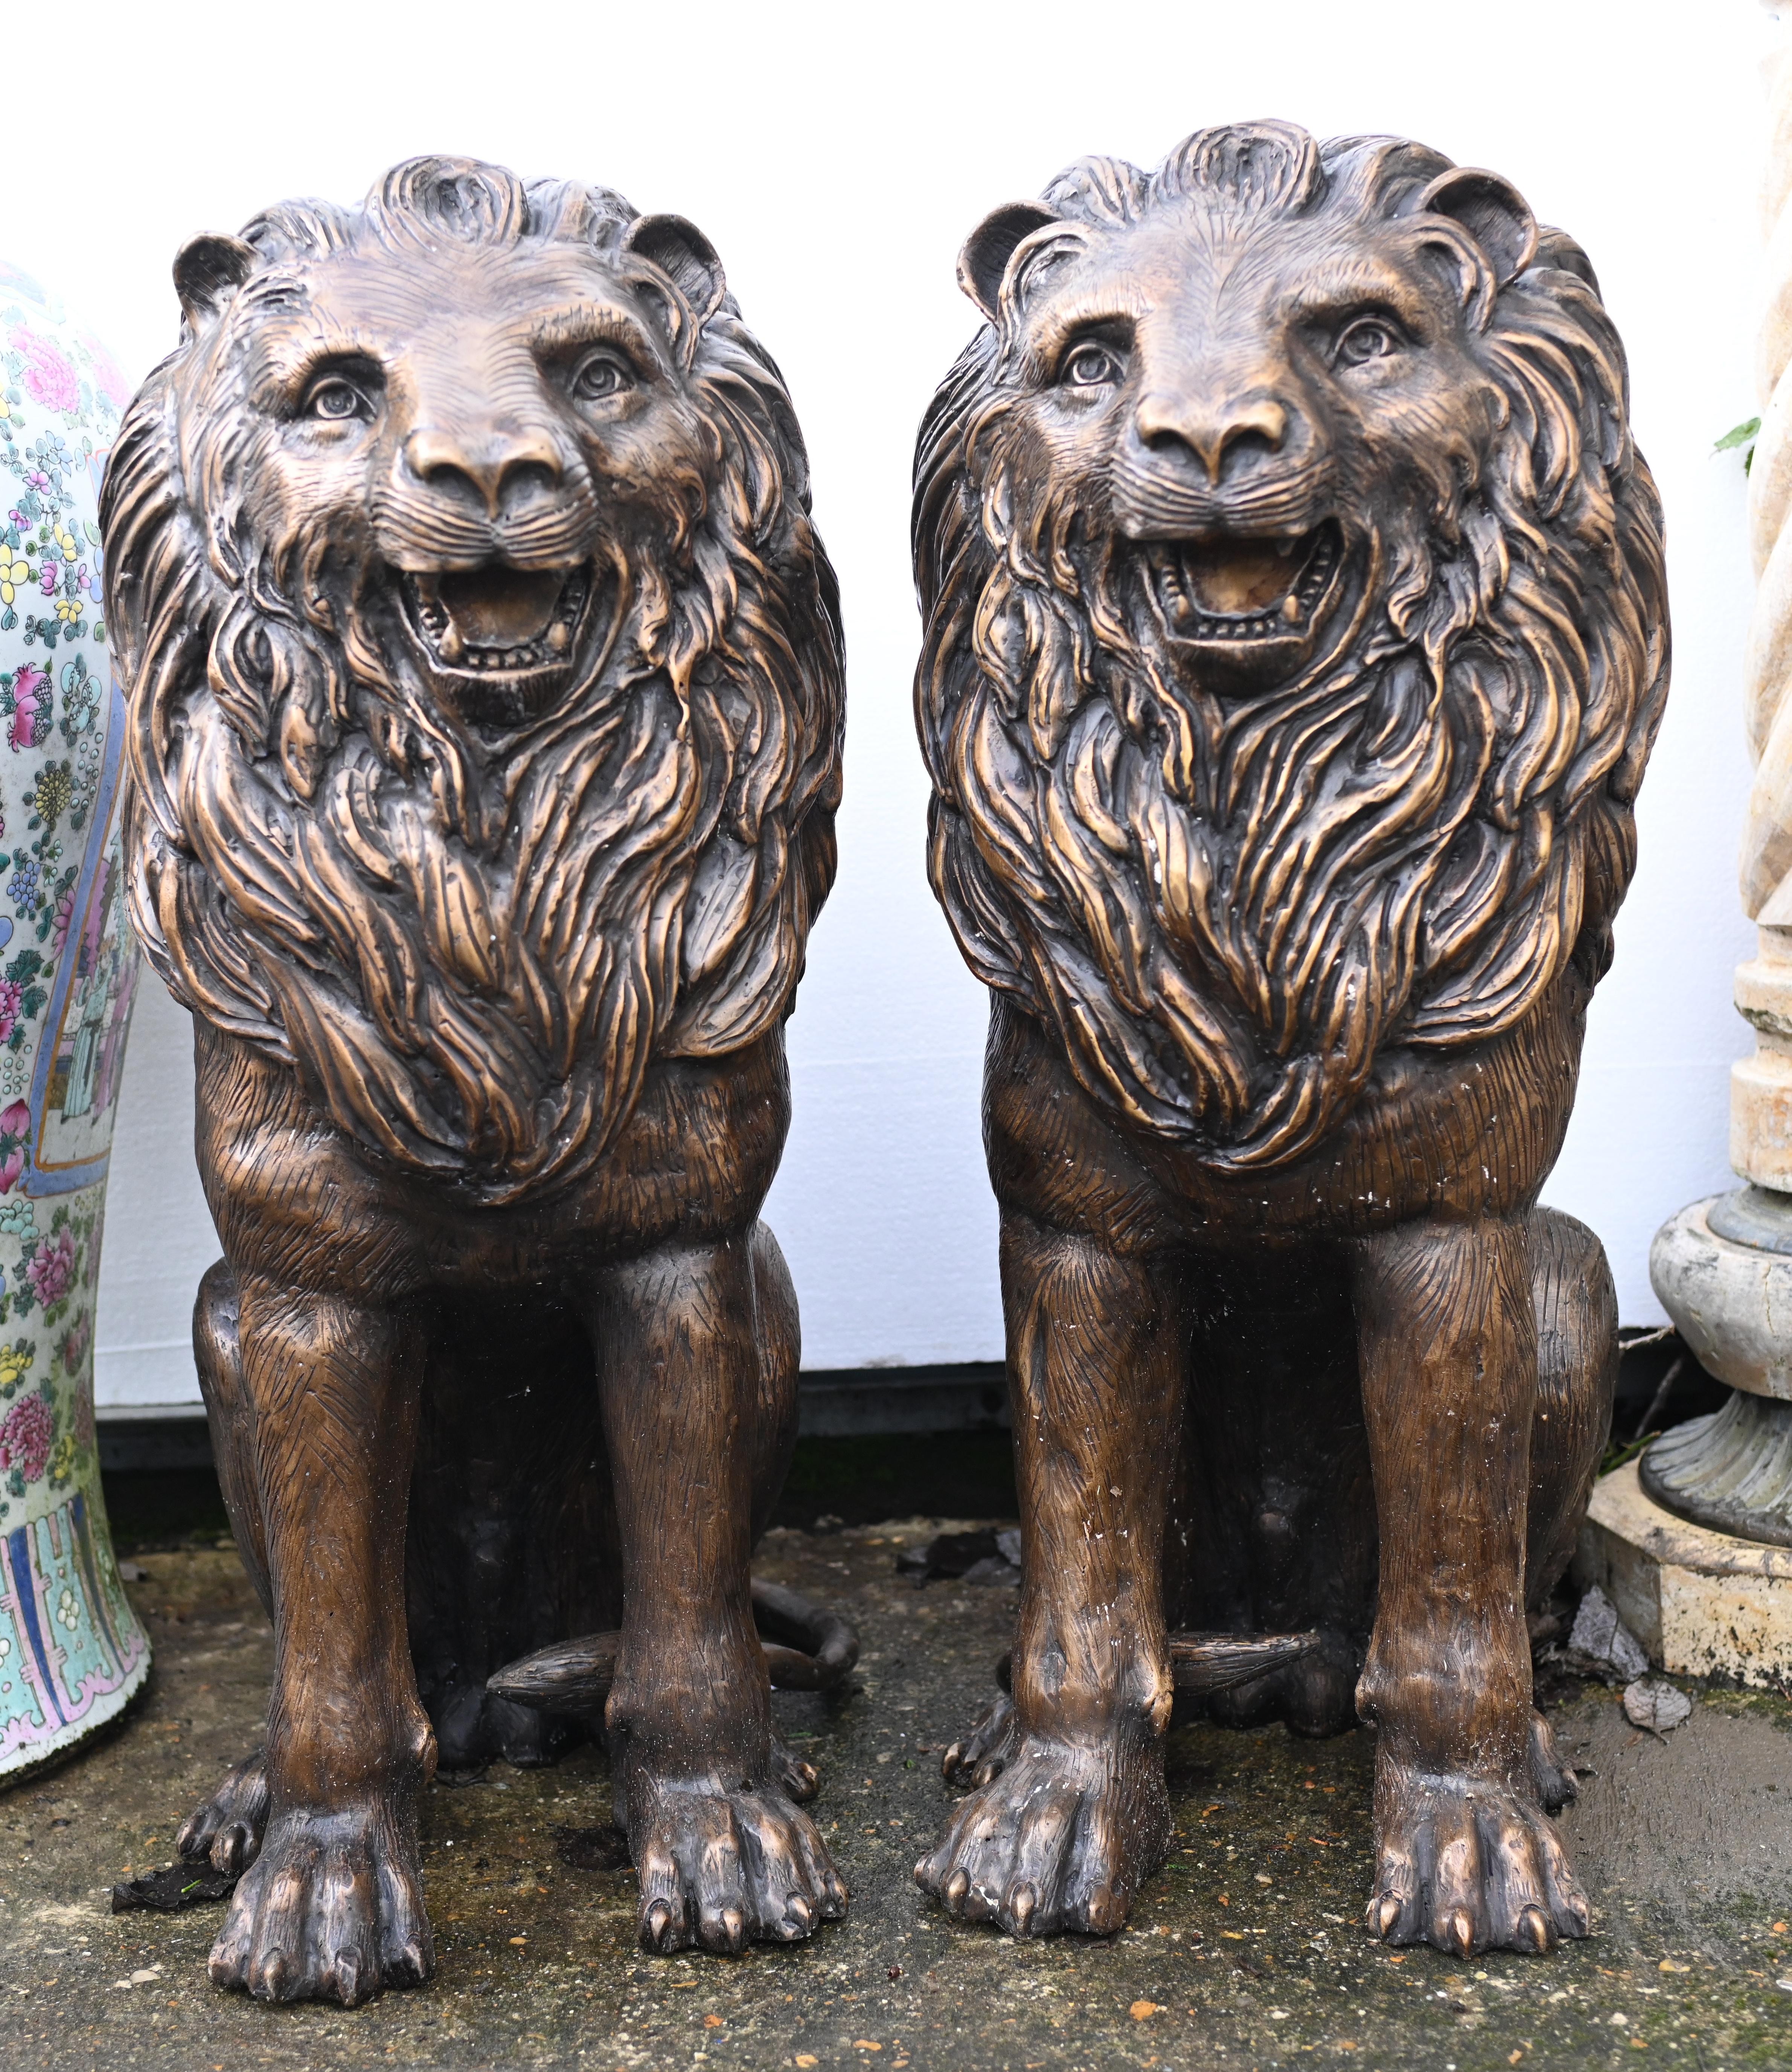 You are viewing an impressive pair of large English bronze lion gatekeeper statues. I hope the photos do this stunning pair some justice, they're certainly more impressive in the flesh.
The lions remind us of the famous ones found in Trafalgar